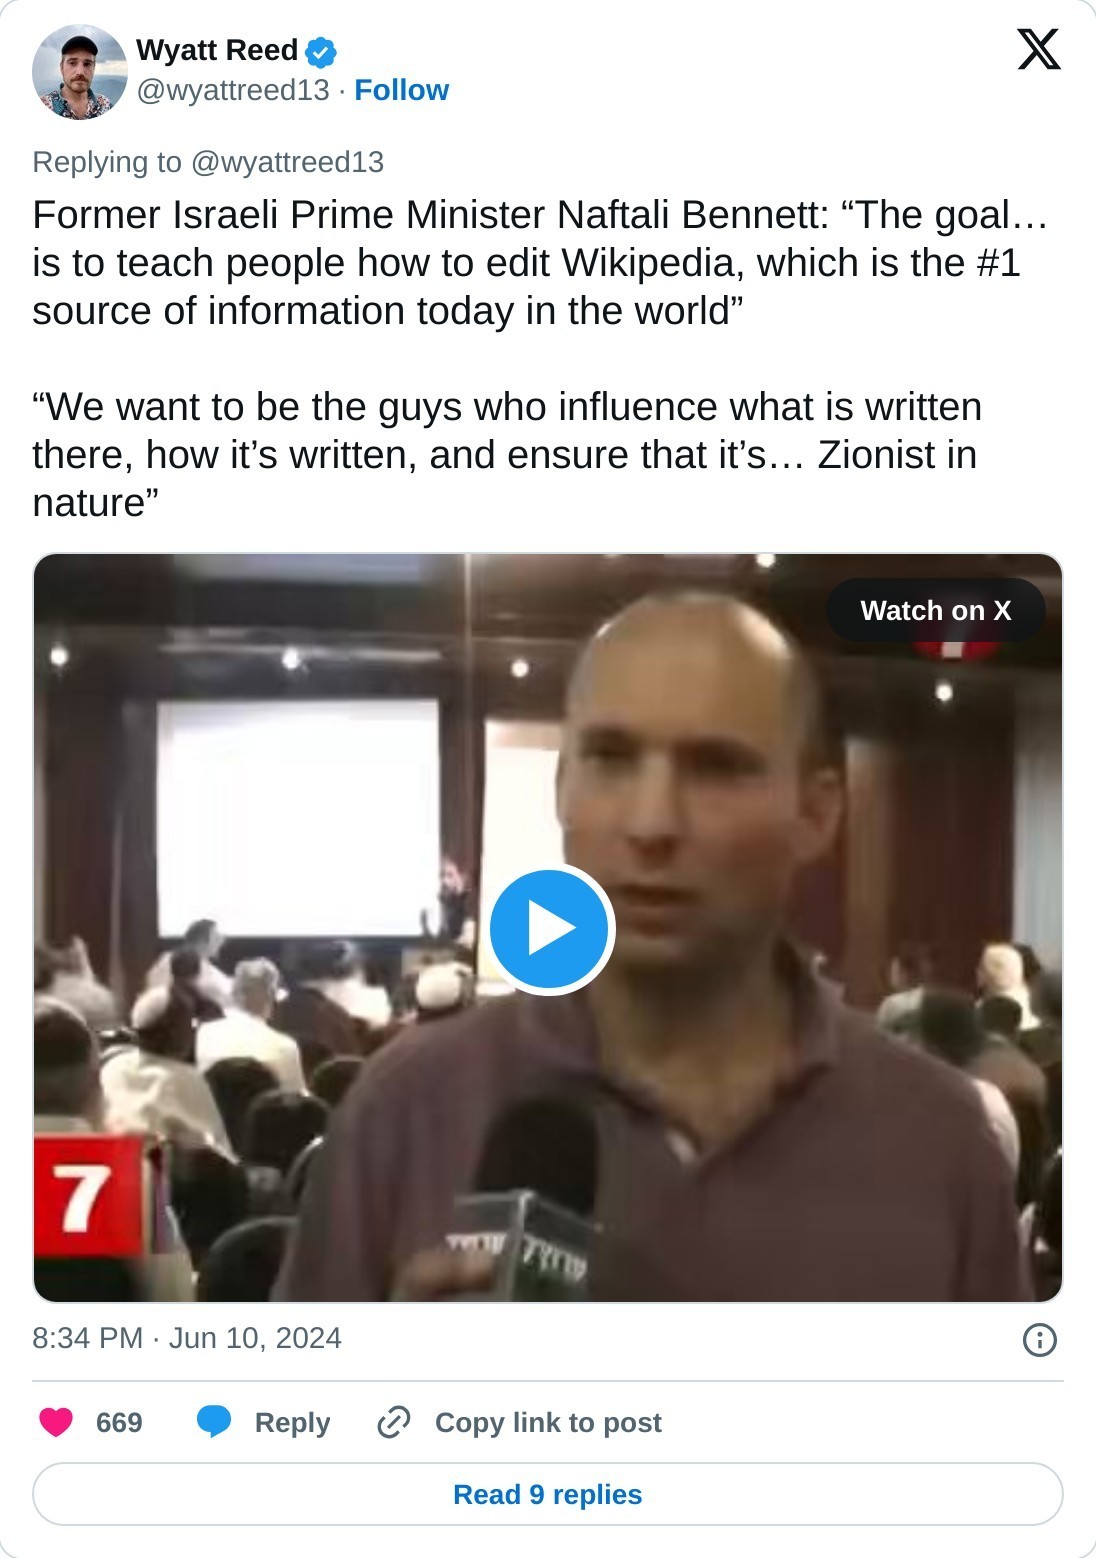 Former Israeli Prime Minister Naftali Bennett: “The goal… is to teach people how to edit Wikipedia, which is the #1 source of information today in the world”  “We want to be the guys who influence what is written there, how it’s written, and ensure that it’s… Zionist in nature” pic.twitter.com/lRjxBopi0x  — Wyatt Reed (@wyattreed13) June 10, 2024